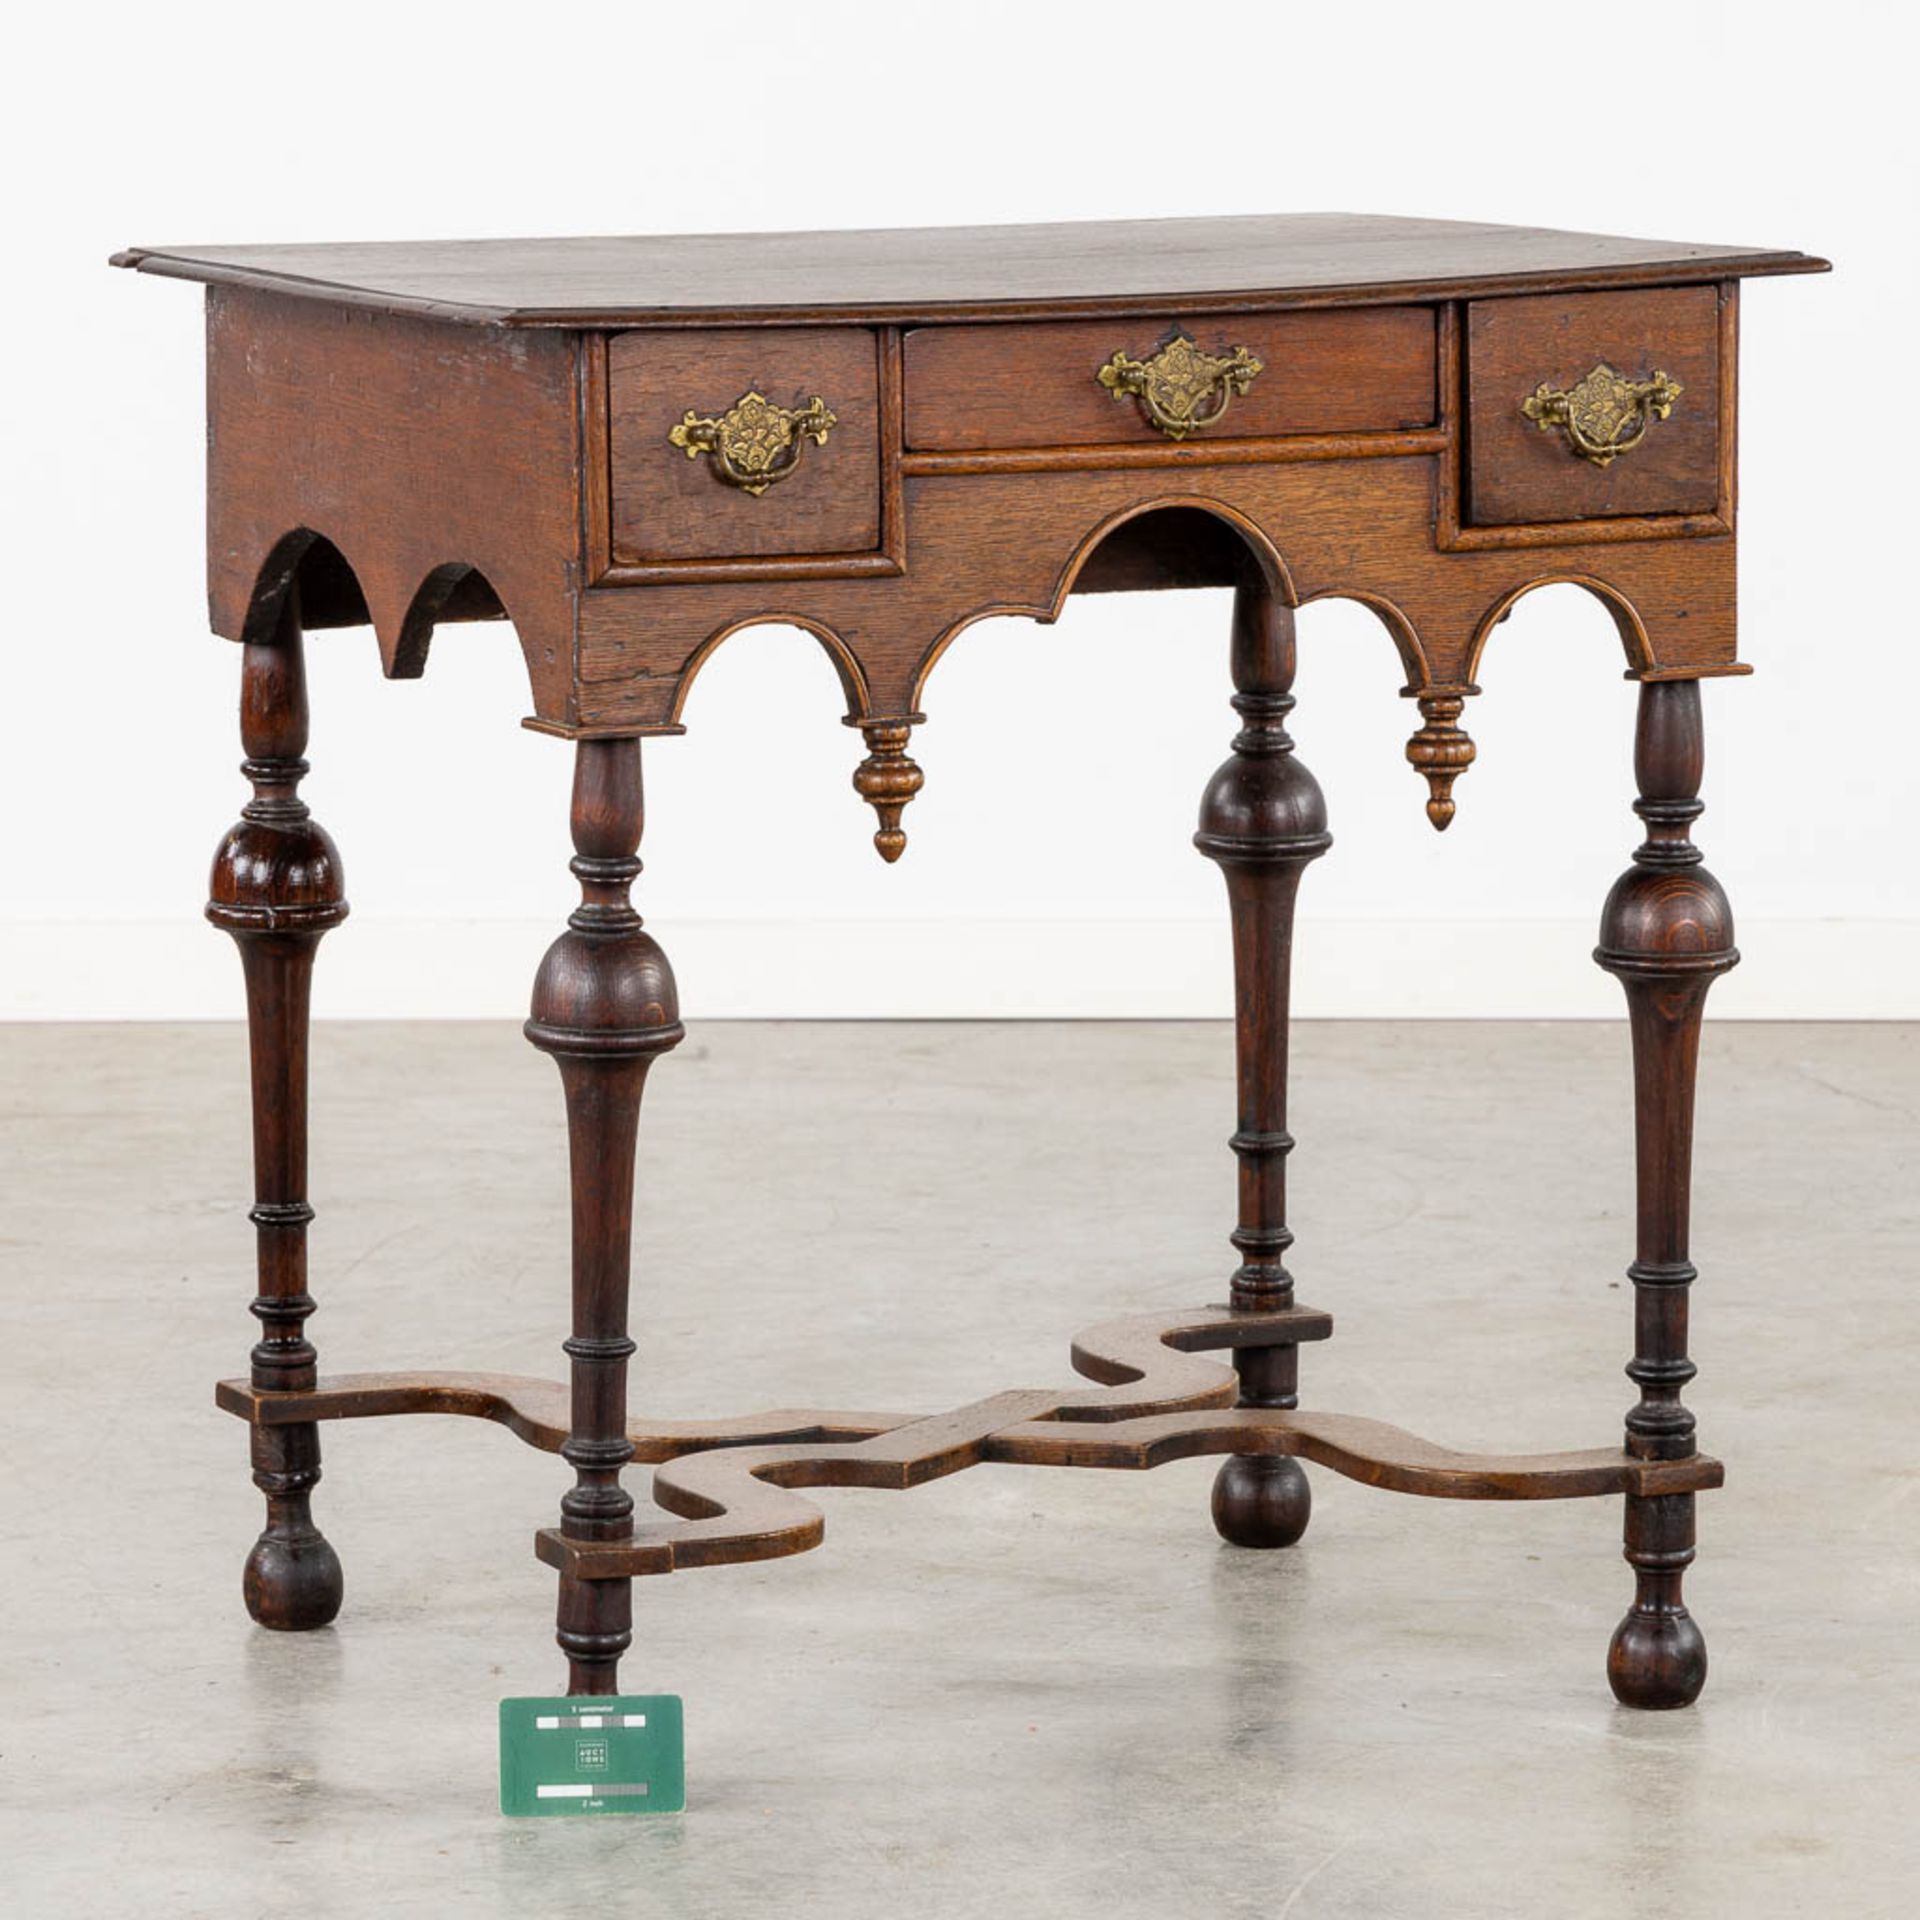 An antique oak 'Pay Table', The Netherlands, 18th C. (L:53 x W:69 x H:70 cm) - Image 2 of 11